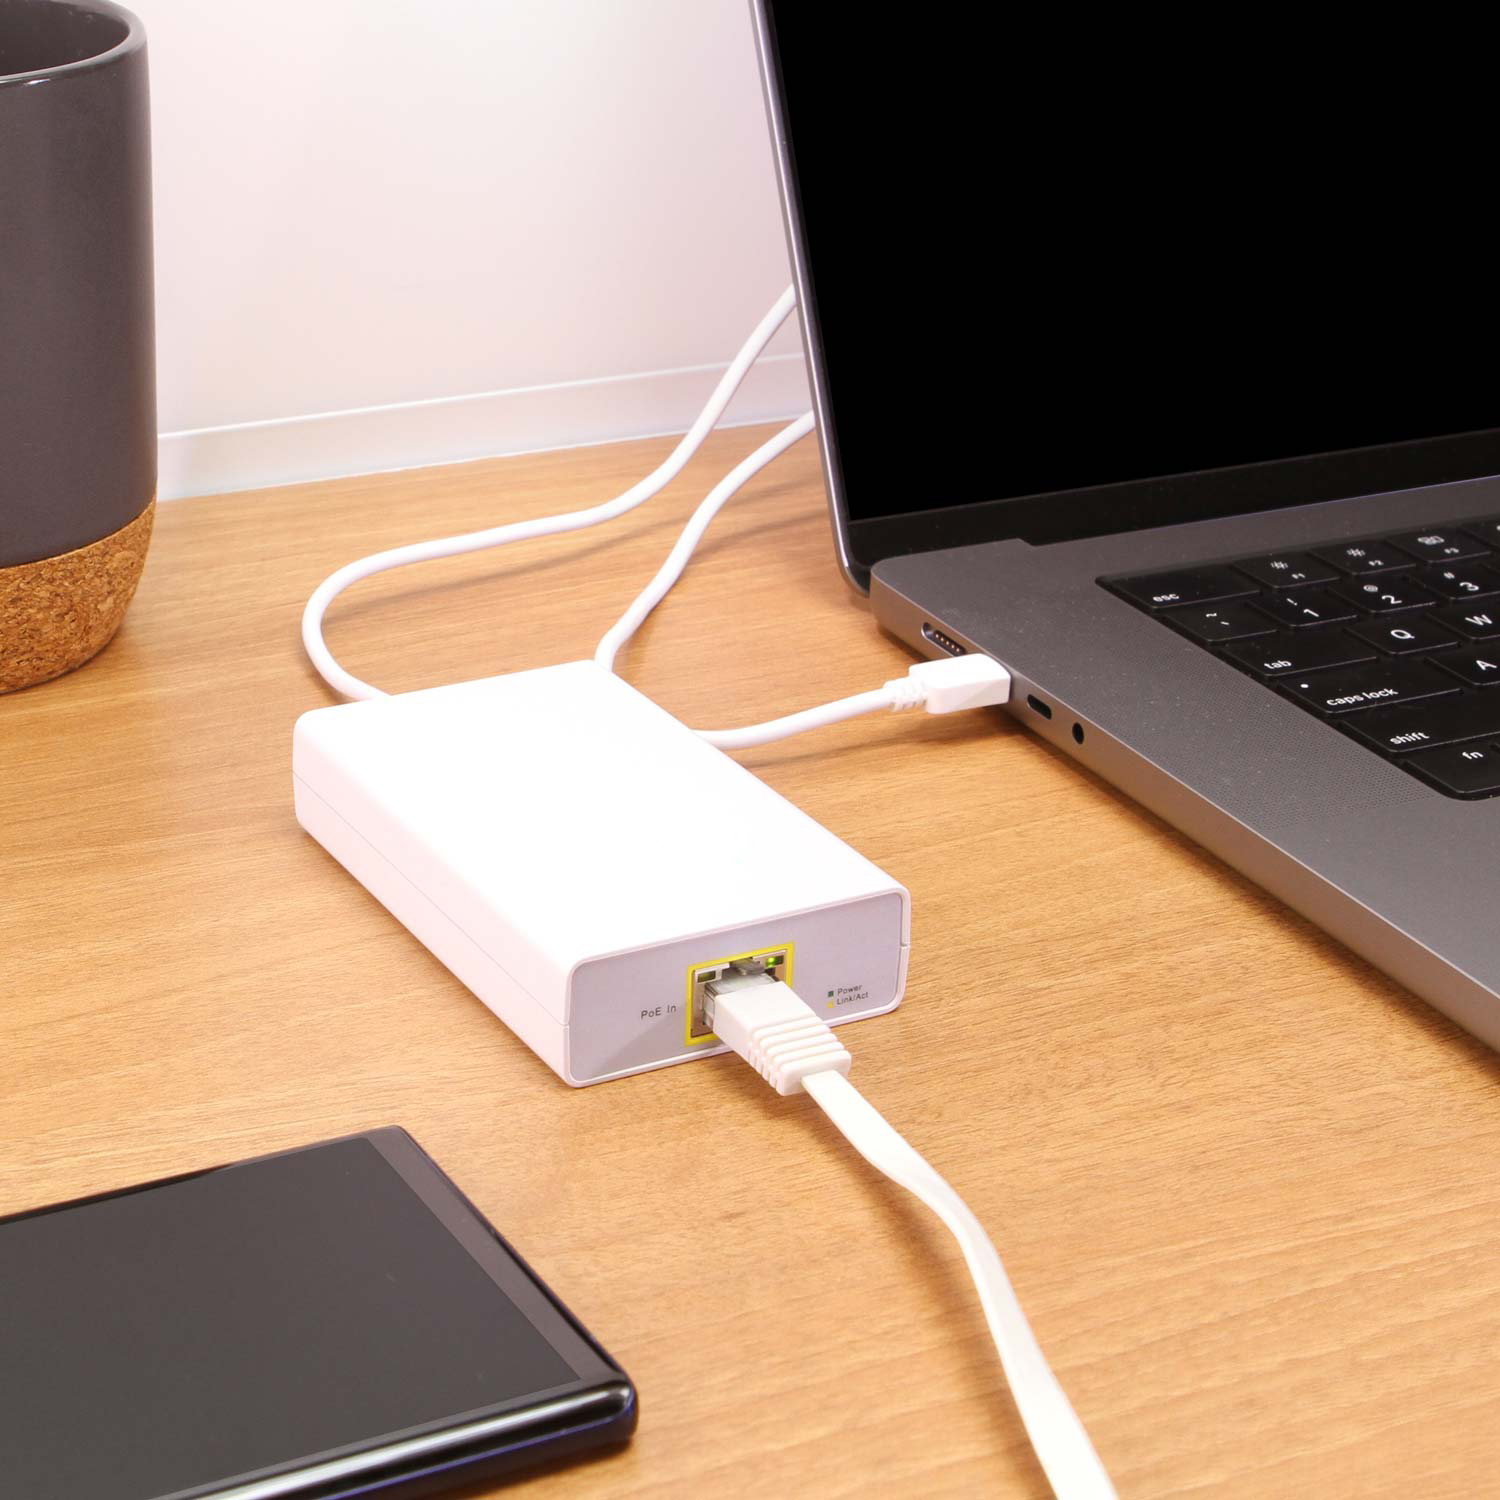 poe power over ethernet adapter charging a laptop